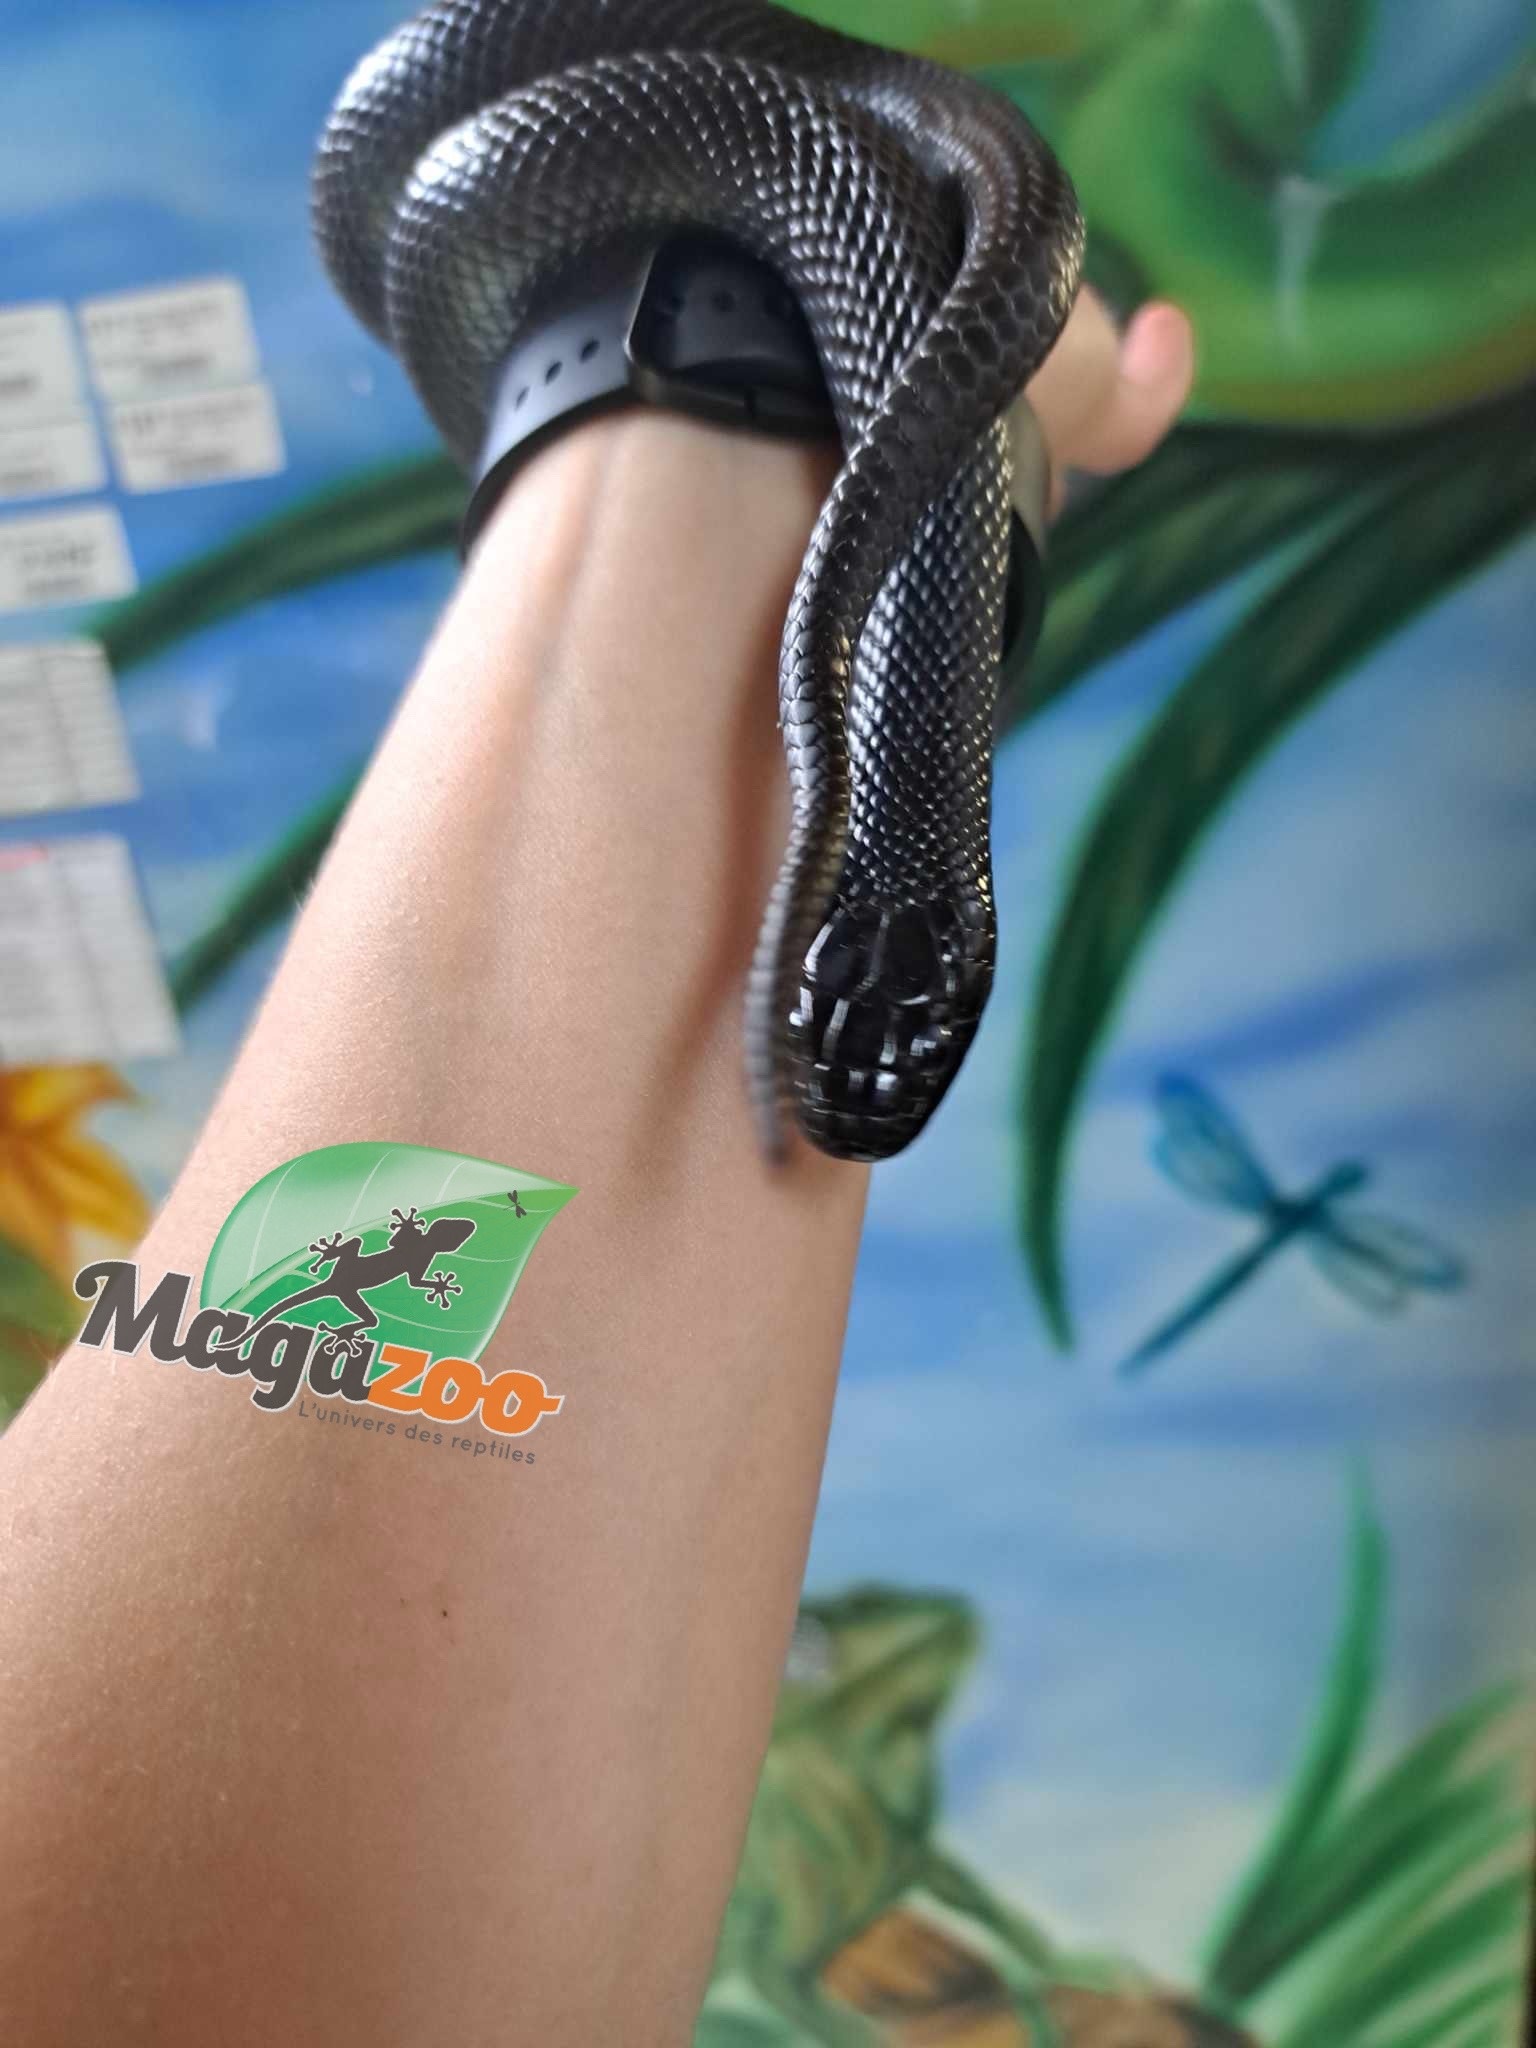 Magazoo Mexican black king snake (Male) 2 years old